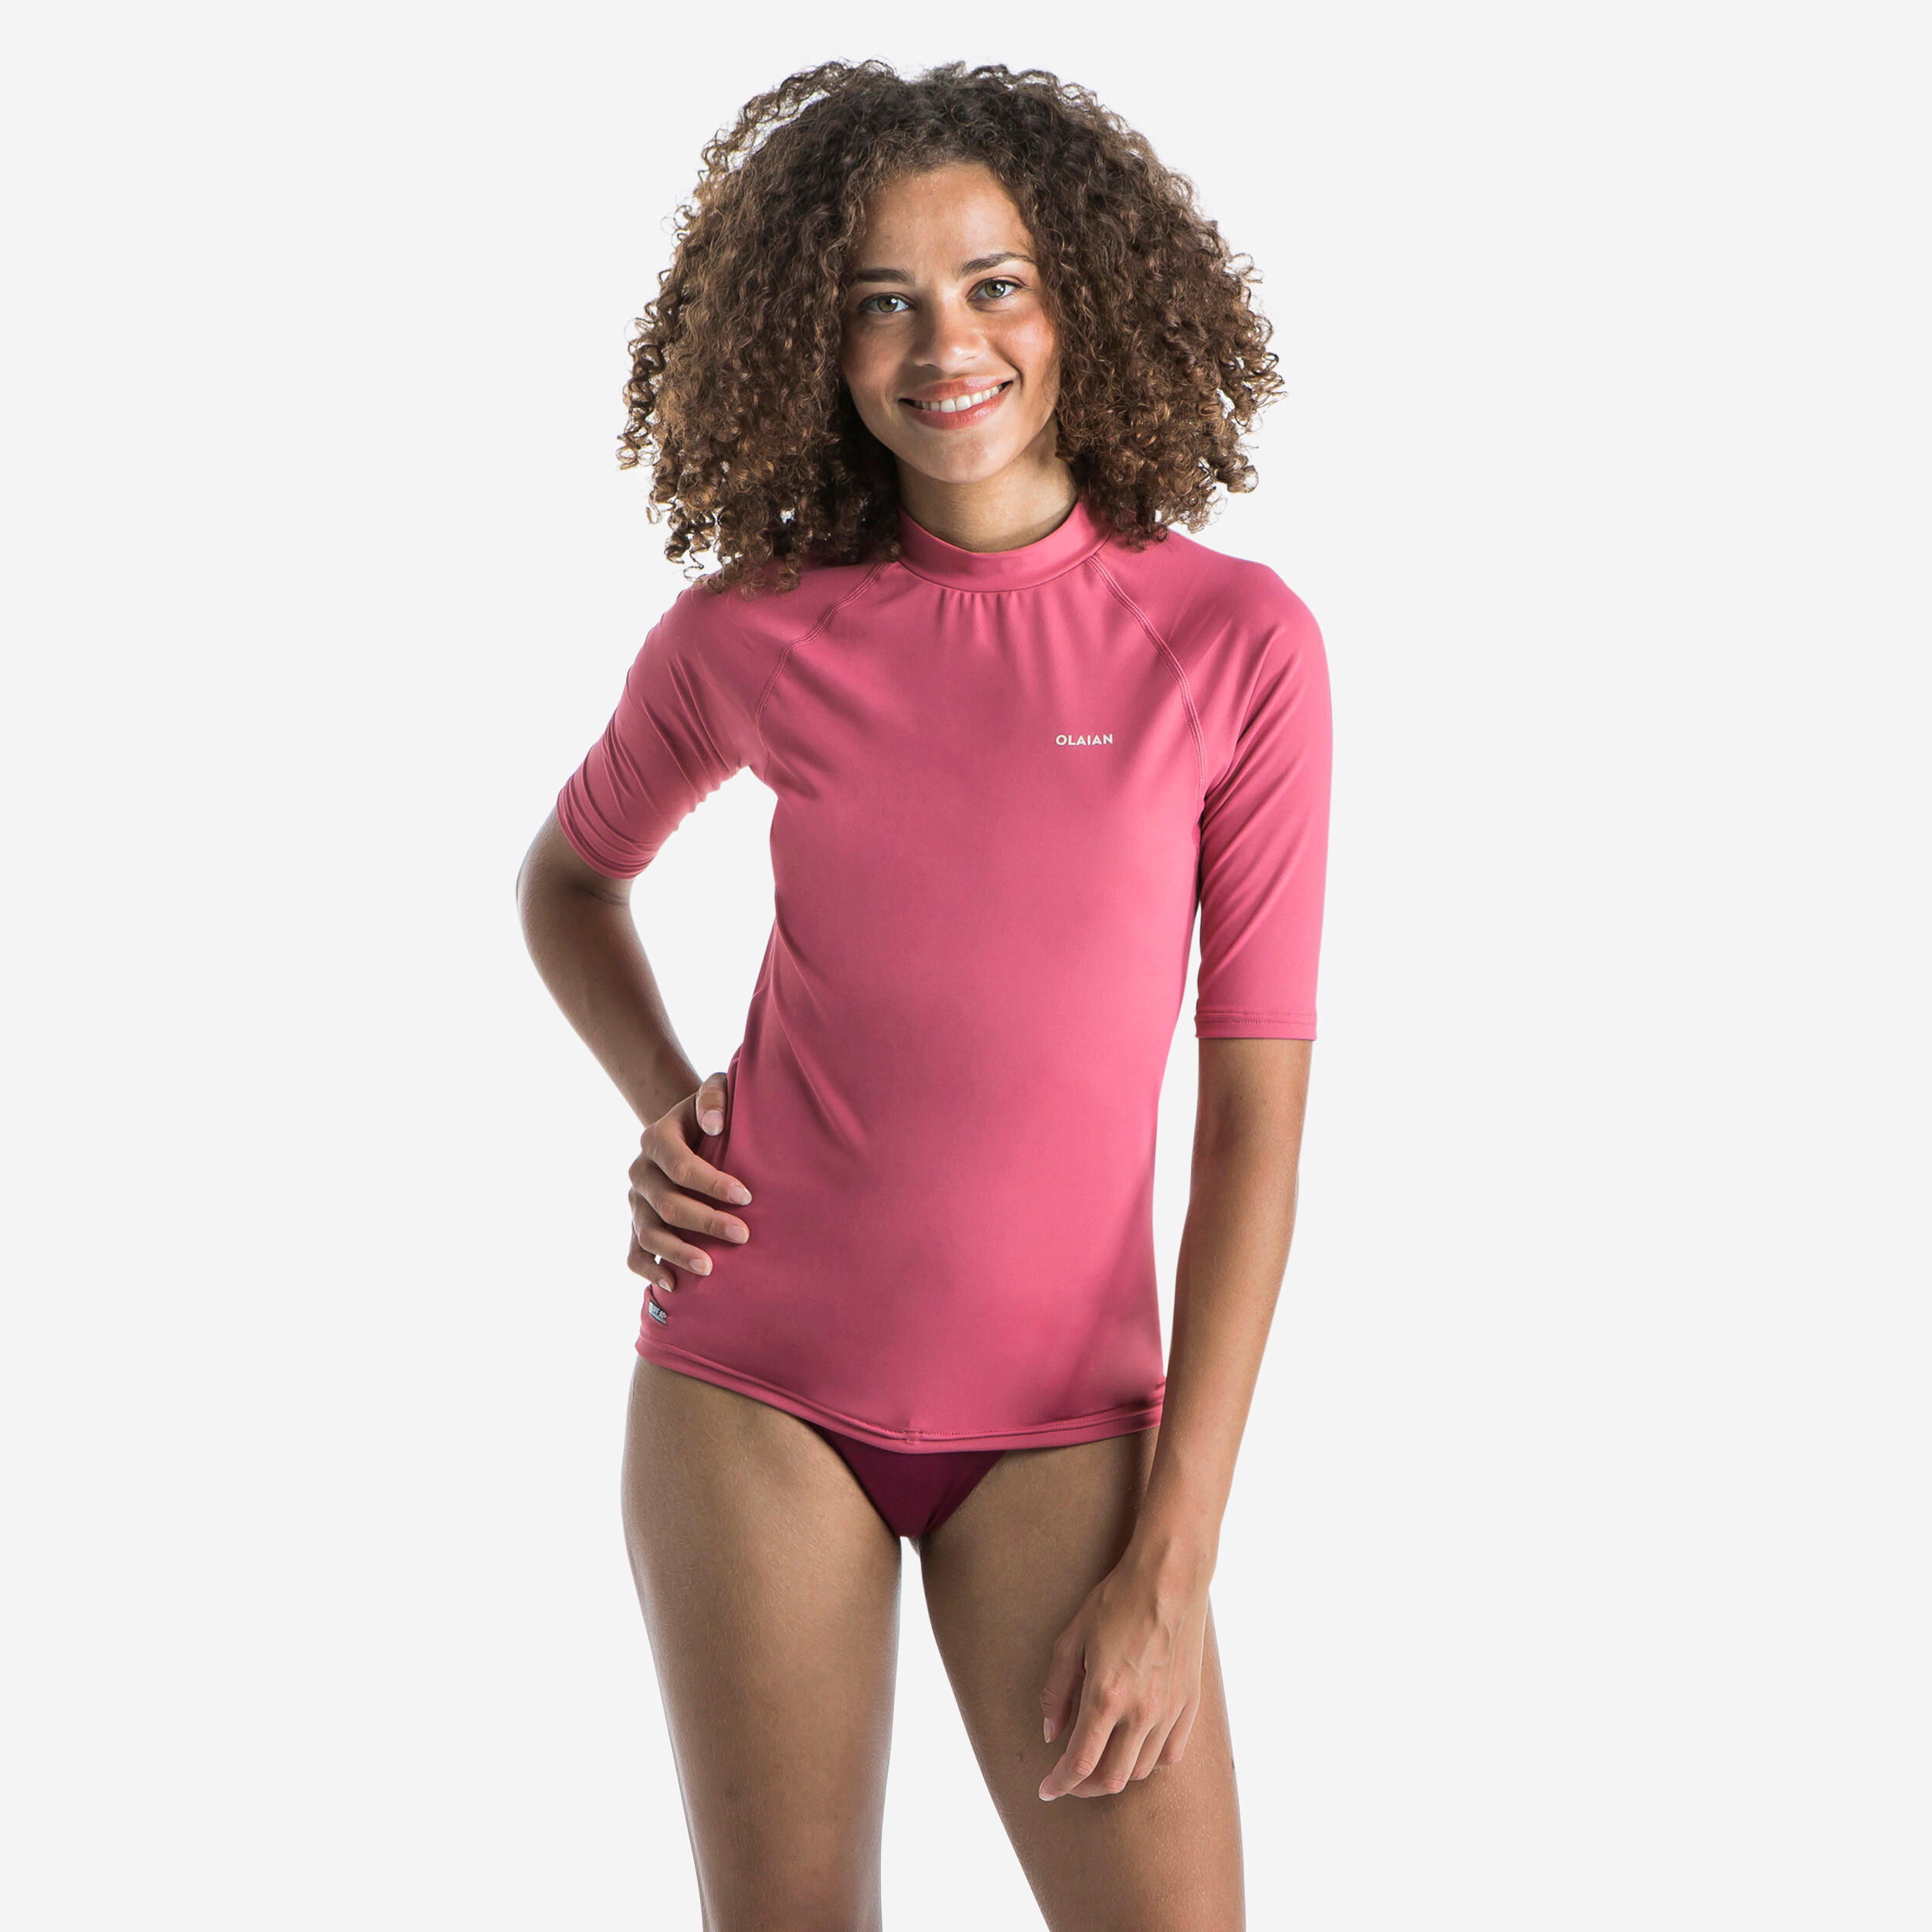 Surfing rash guard for women with a built in BRA!! Goes up to H CUPS  LADIES!!! This top is Made-to-Measure! www.fluidsunw…